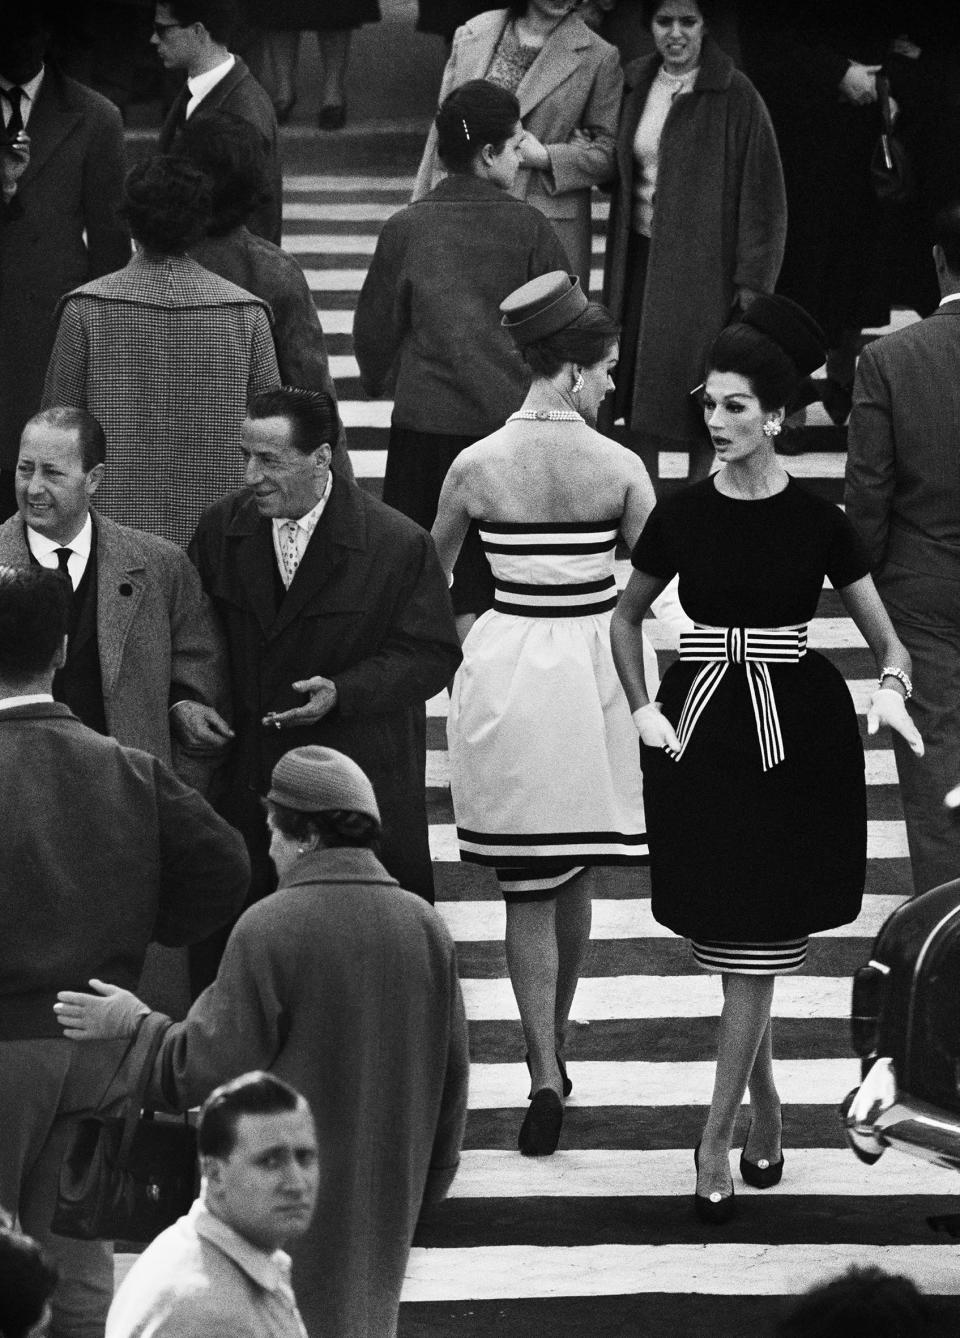 Using a telephoto lens and a radio for communications to shoot from afar, only the models were aware they were being photographed for “Nina and Simone, Piazza di Spagna; Rome, 1960.” - Credit: Photo by William Klein, Courtesy Howard Greenberg Gallery